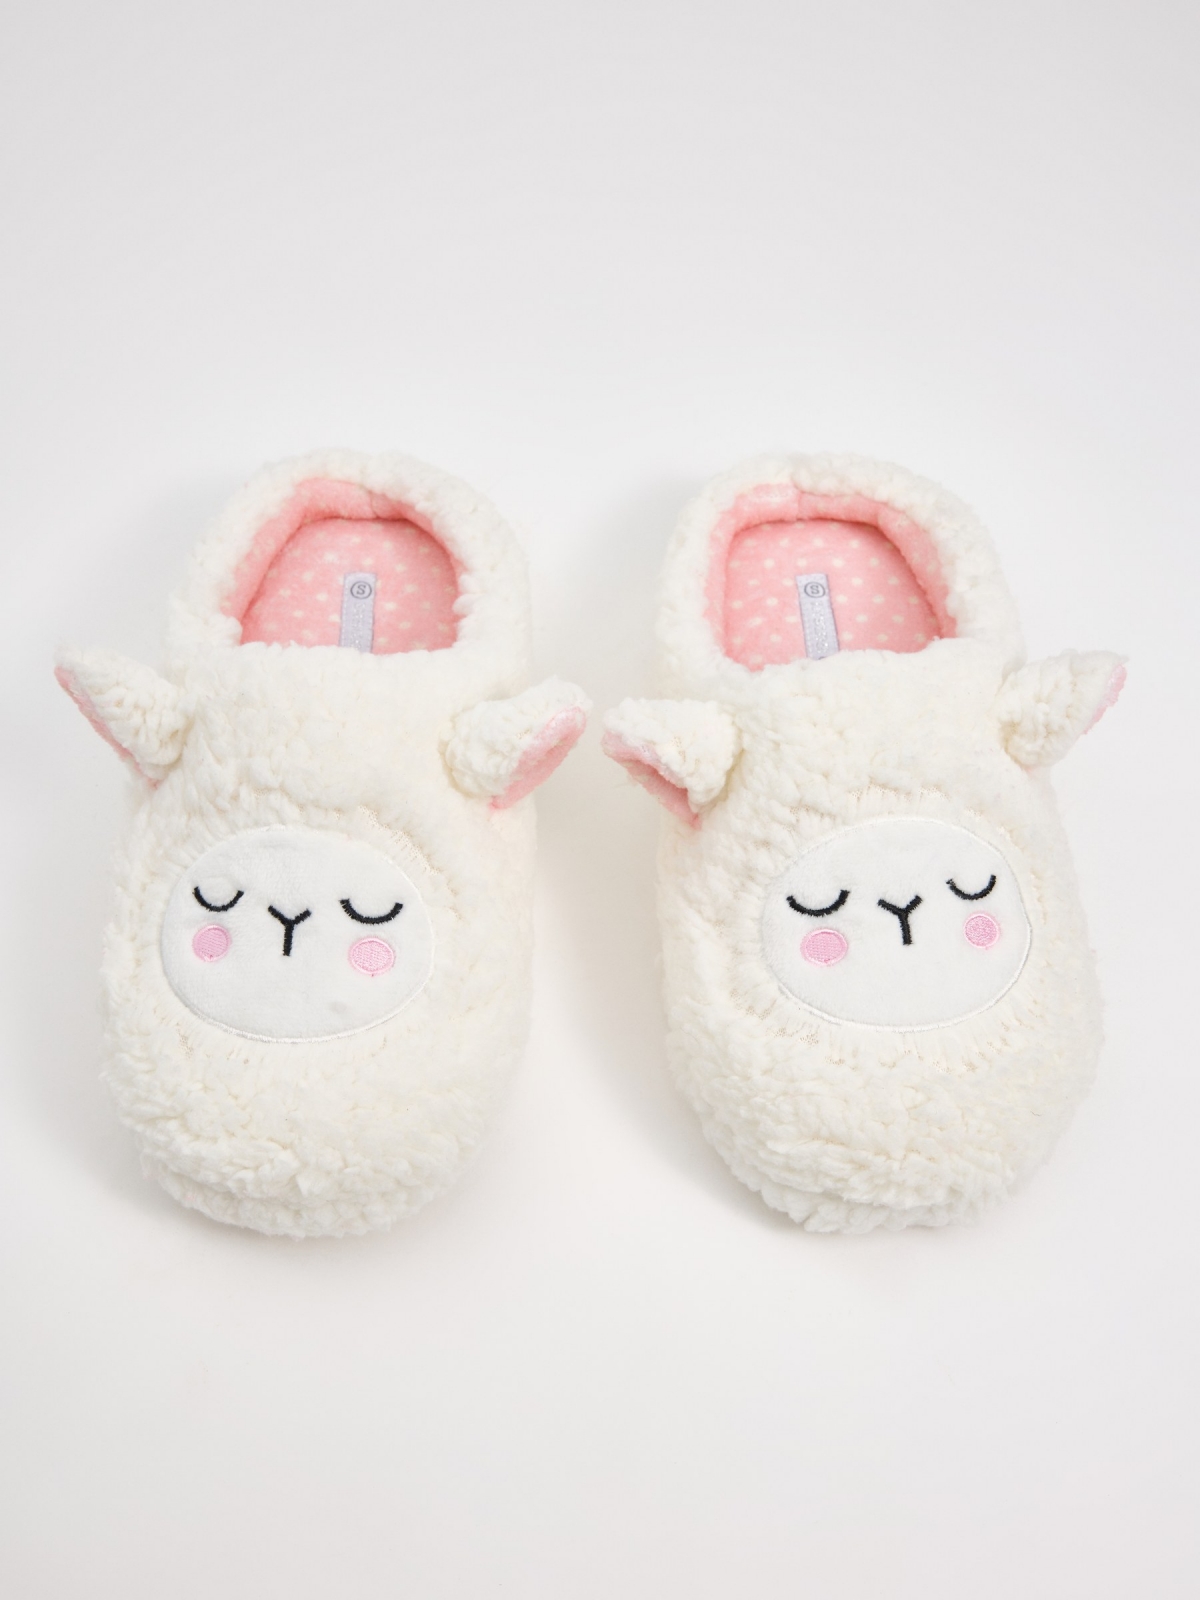 Little sheep slippers off white foreground